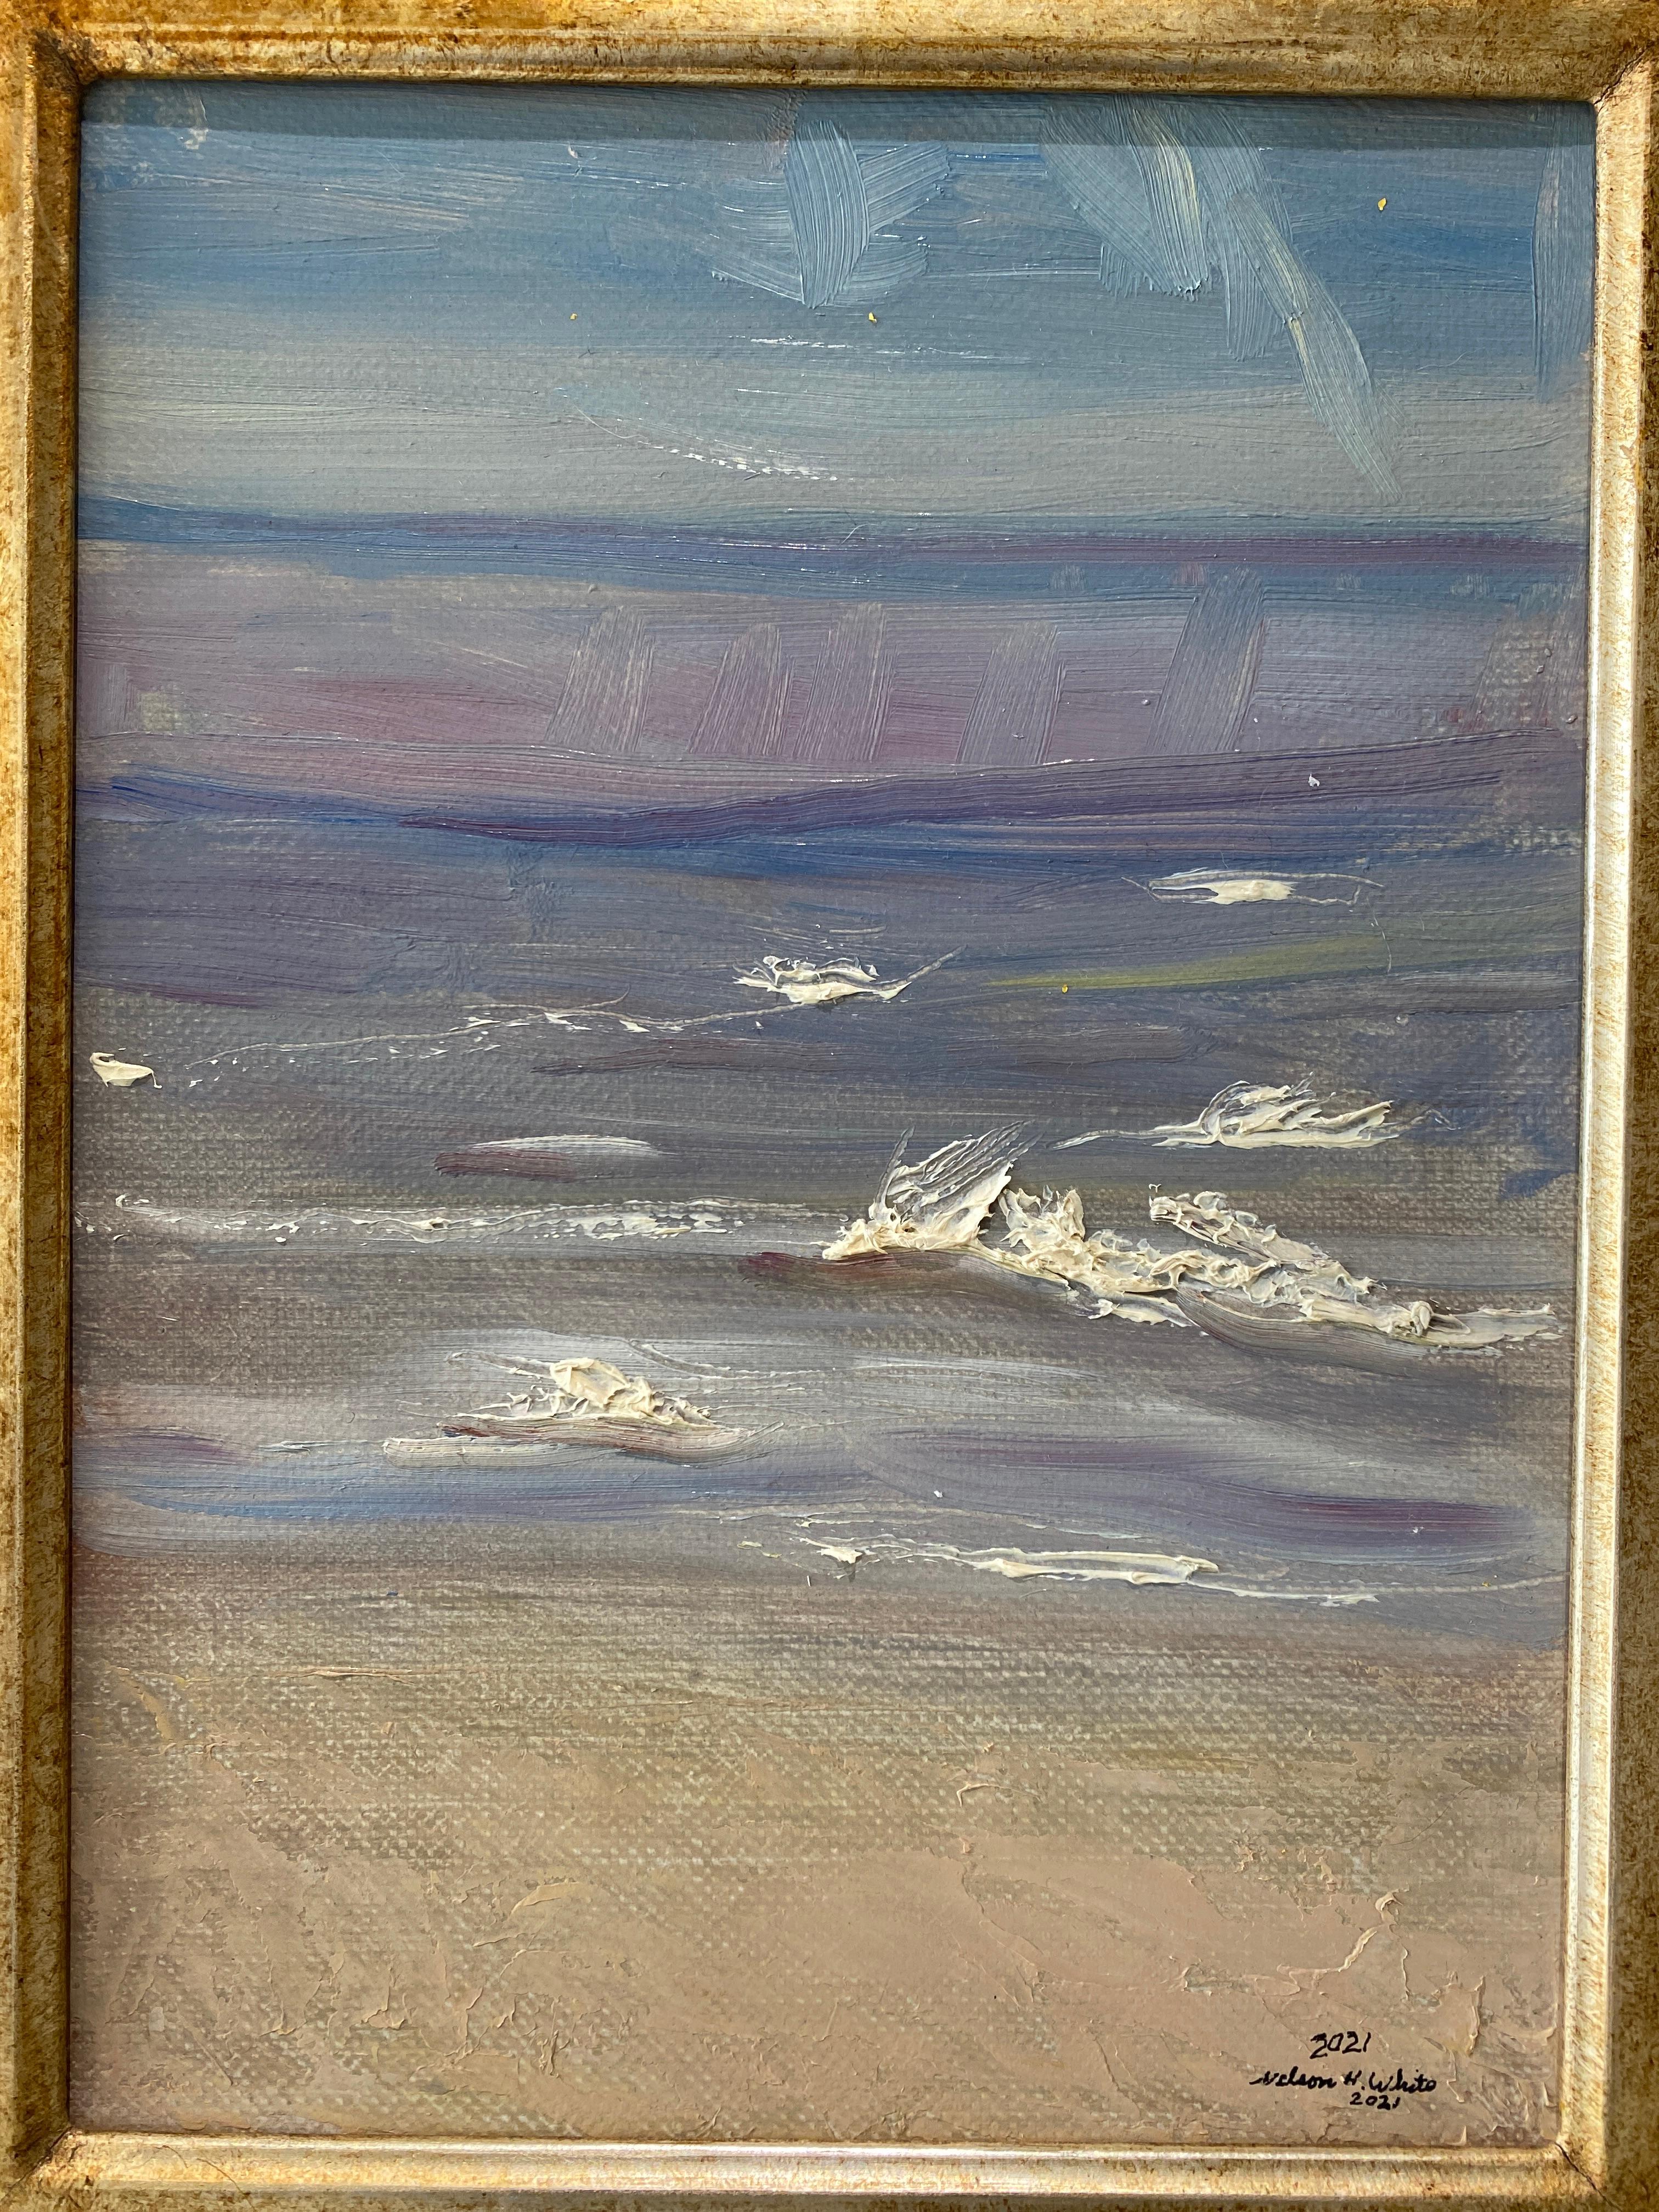 White displays a multitude of shapes and colors a wave makes throughout its motion in this plein-air painting. The water blends in with the sky in the background and the sand in foreground. The textures are created by his palette knife. 